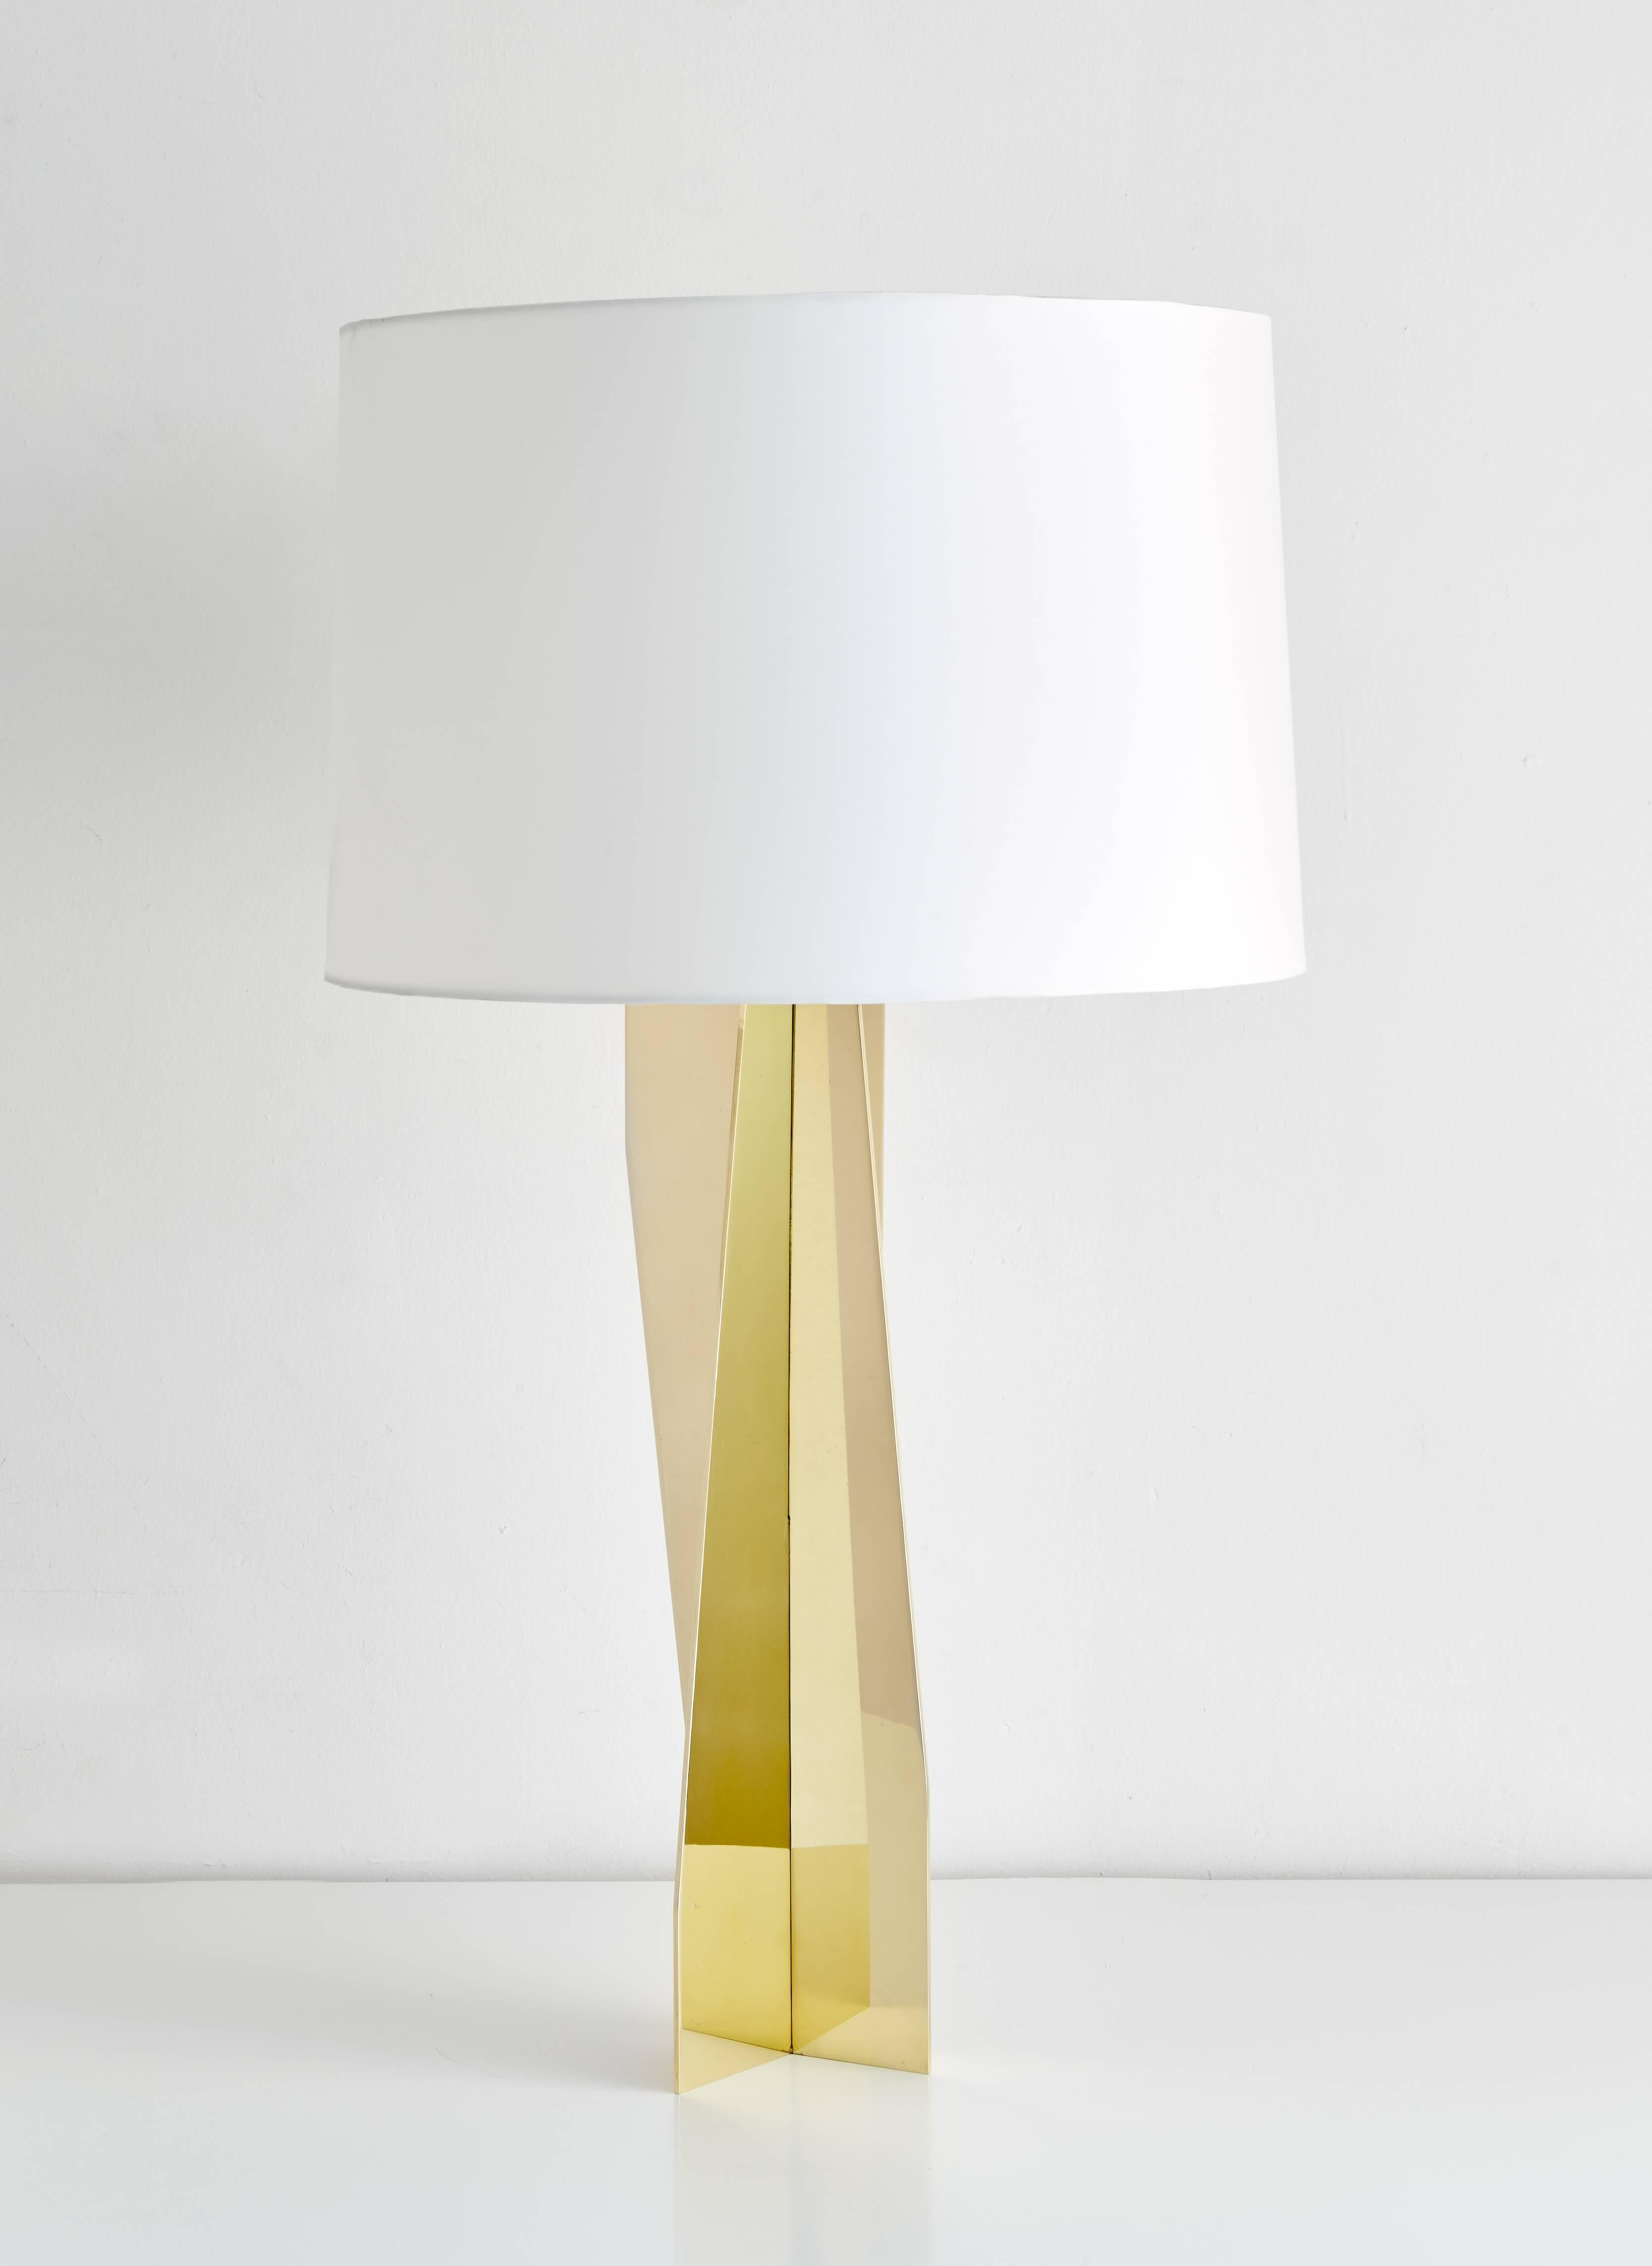 Geometric, reflective, strikingly modern, this made to order brass lamp can be customized in any size finish or material. Shown here in mirror polished finish with a white silk shade.